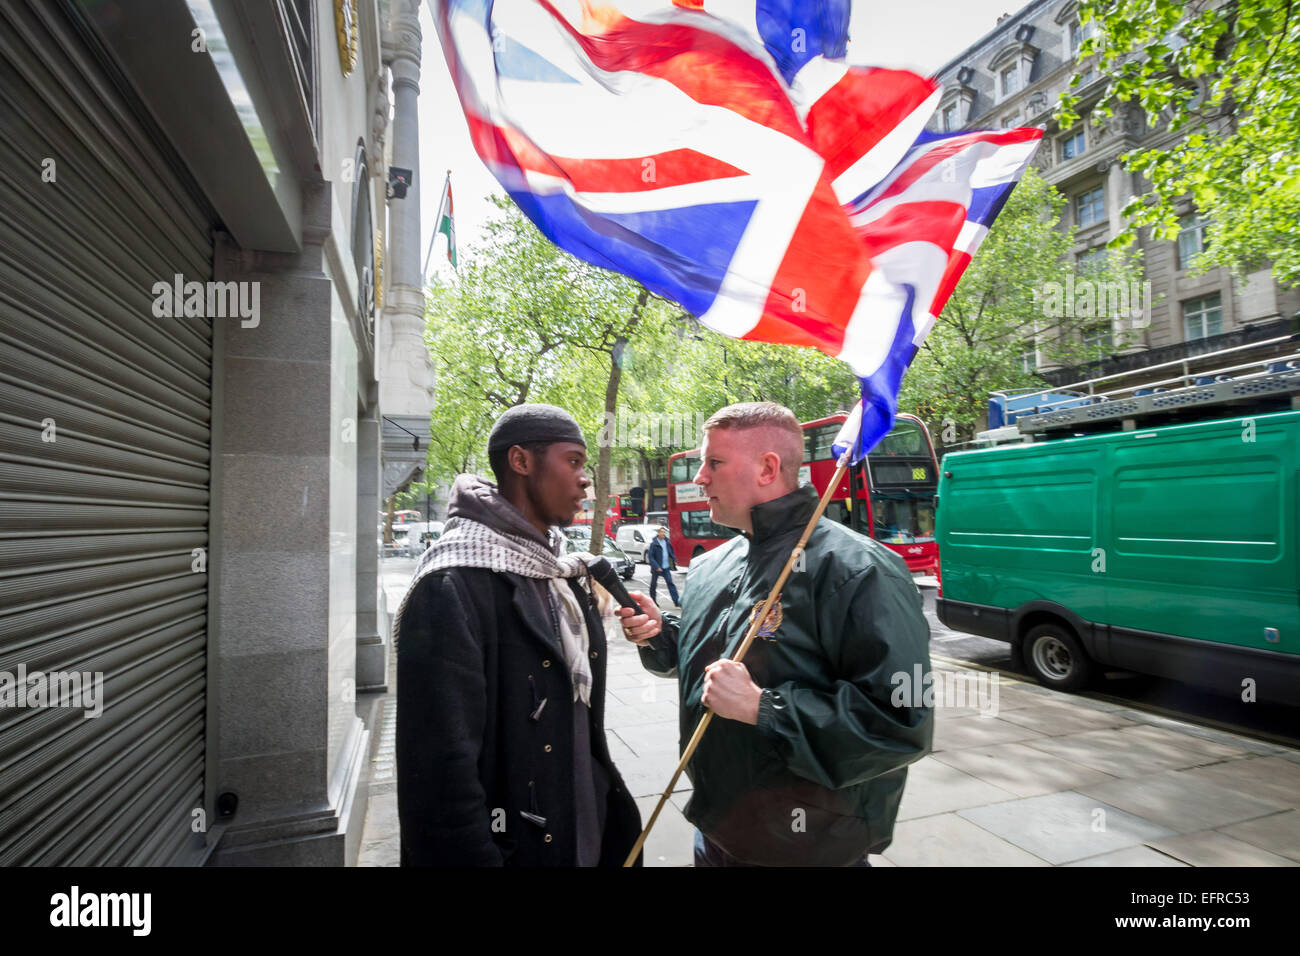 Brustchom Ziamani (L) pictured here 9th May 2014 outside the Indian High Commission in London being confronted by Paul Golding (R) of Britain First Nationalist movement.  Brustchom Ziamani, 19, has been remanded in custody after appearing in court to face terror allegations. Ziamani, of Camberwell, south-east London, has been accused of "engaging in conduct in preparation of terrorist acts" on or before 19th August 2014. Mr Ziamani was arrested in east London on Tuesday 19th Aug 2014. He is currently on trial at Old Bailey court. Stock Photo